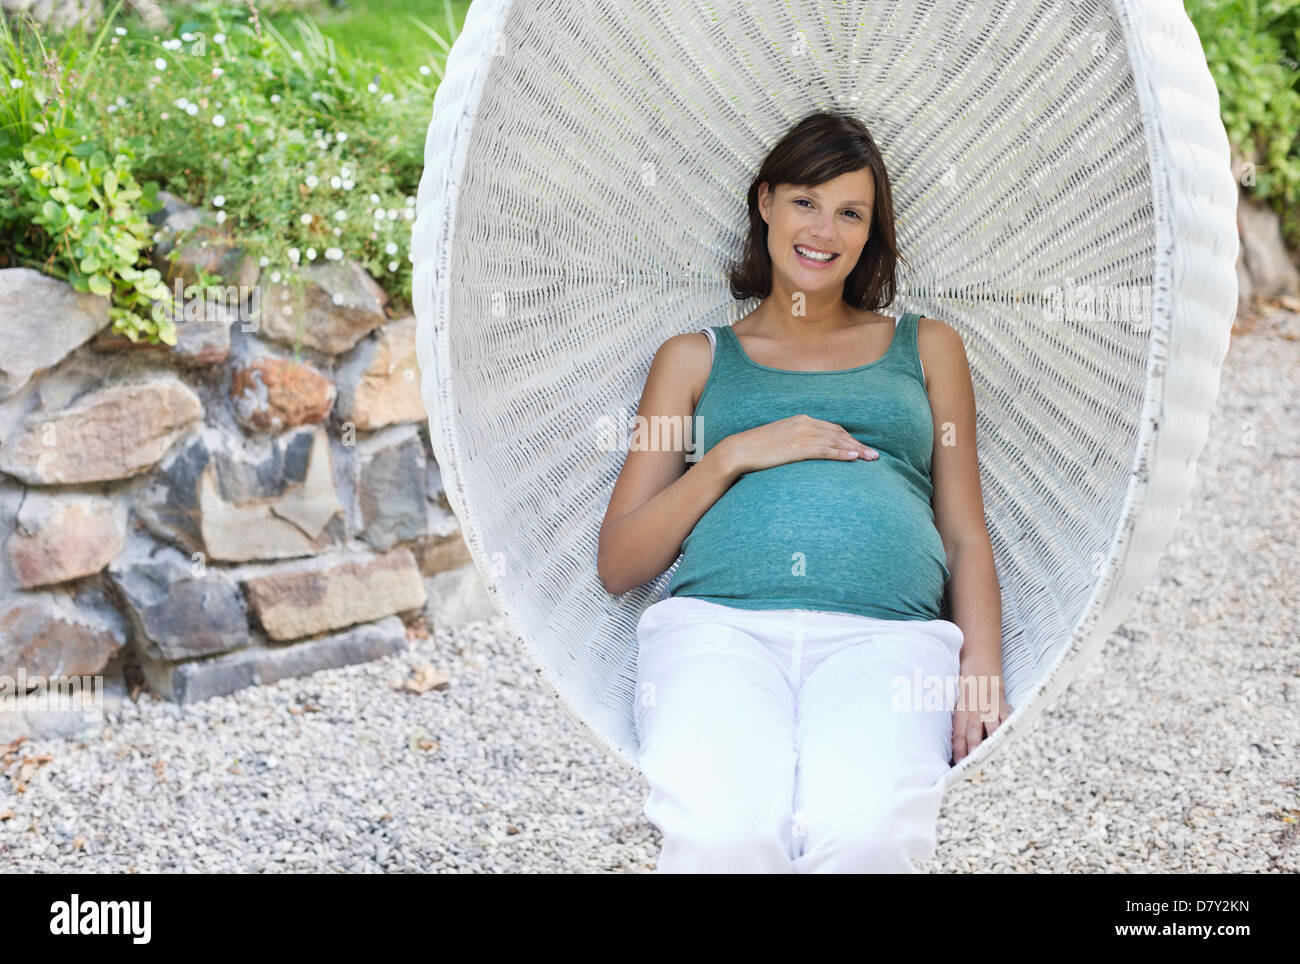 Pregnant woman relaxing outdoors Stock Photo